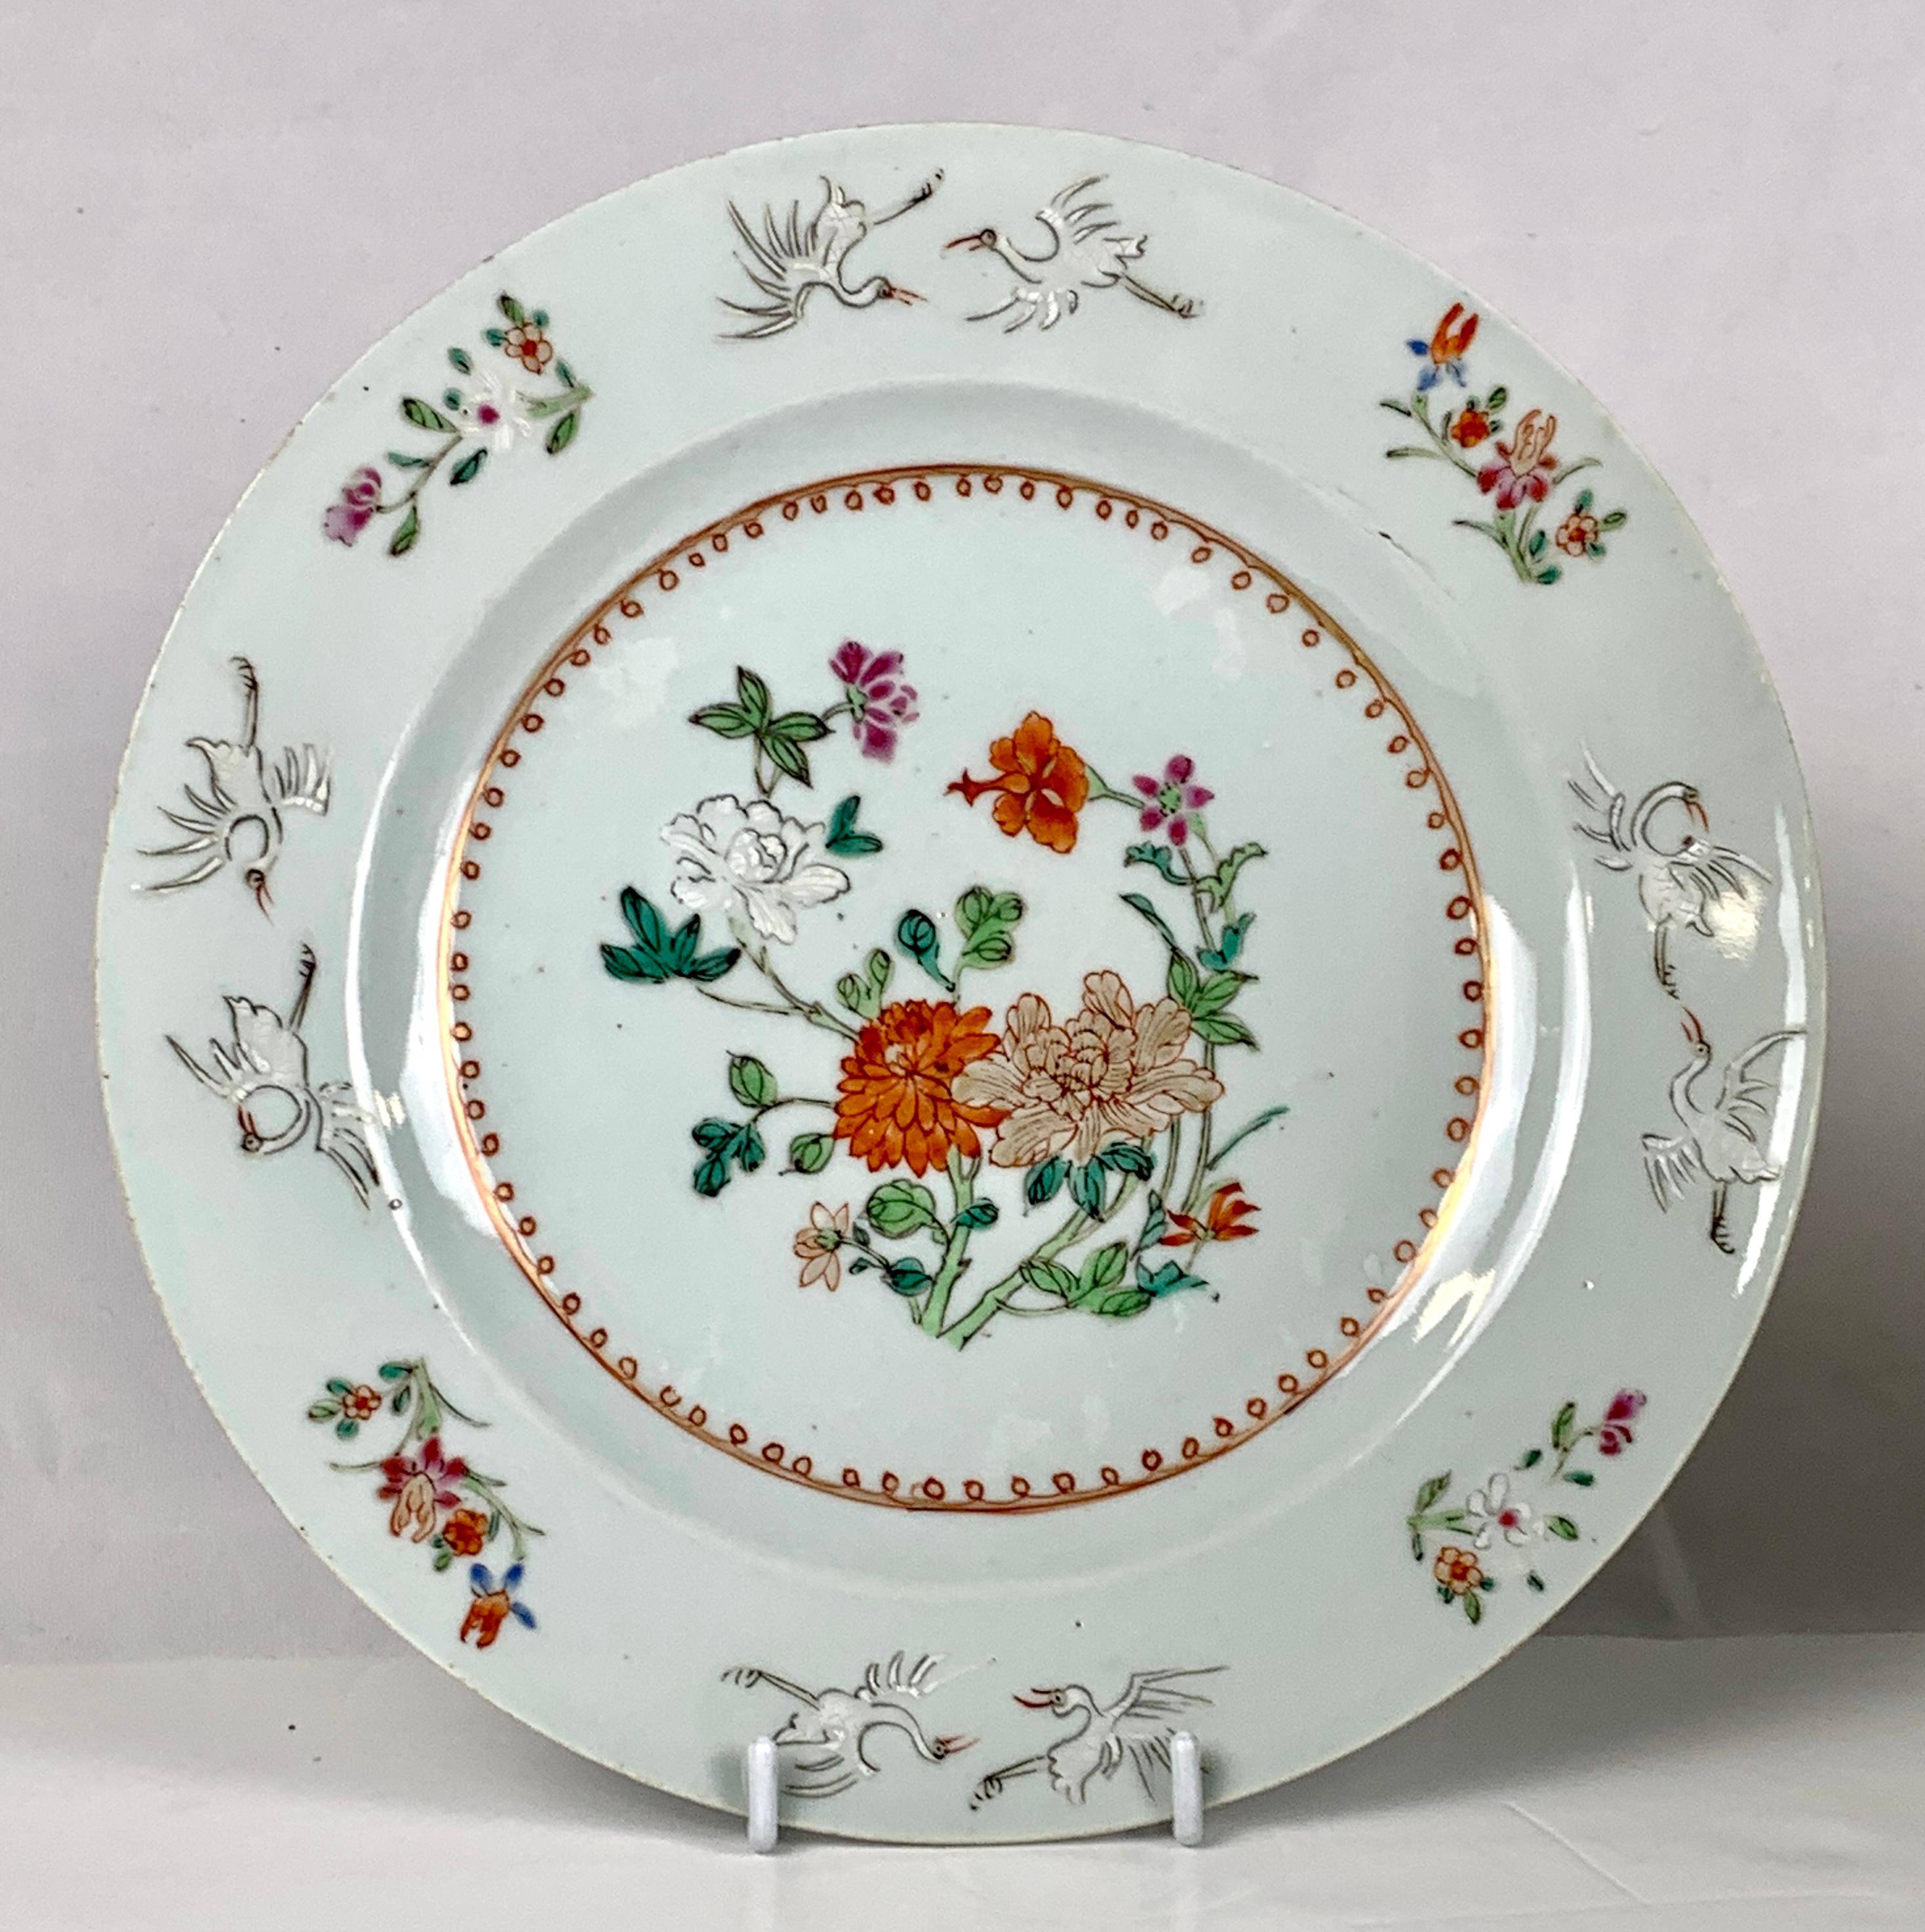 This pair of lovely Chinese porcelain plates were hand painted in the Famille Rose style in the mid-18th century. The center of each plate is painted in delicate colored enamels and gold.
Small green leaves enhance lovely peonies and other flowers